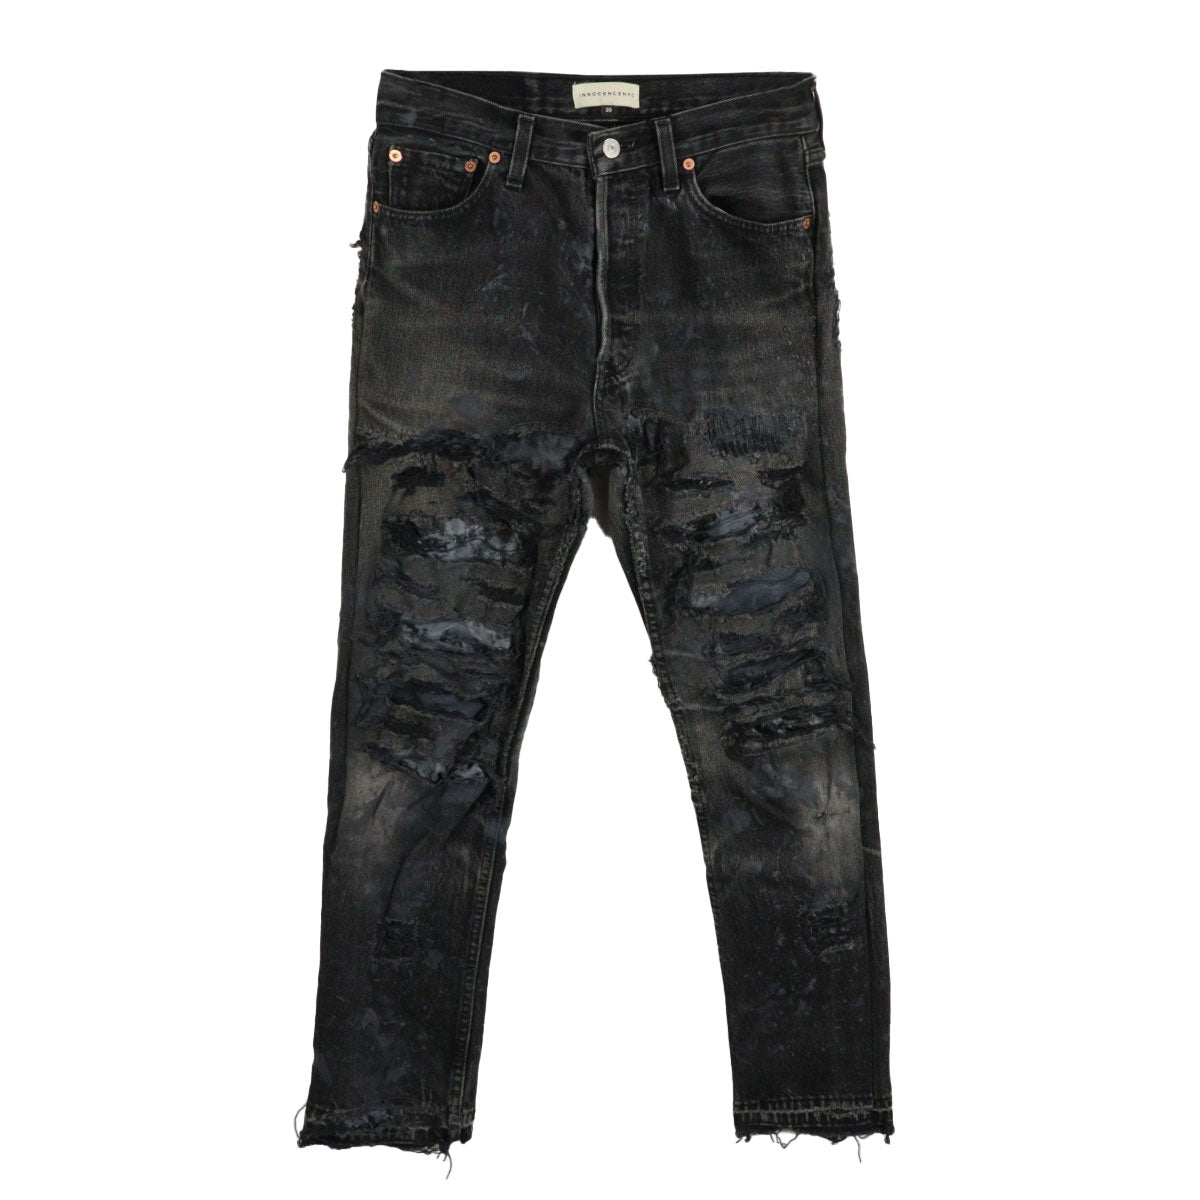 DESTROY LEATHER DENIM PANTS 30A | Why are you here?